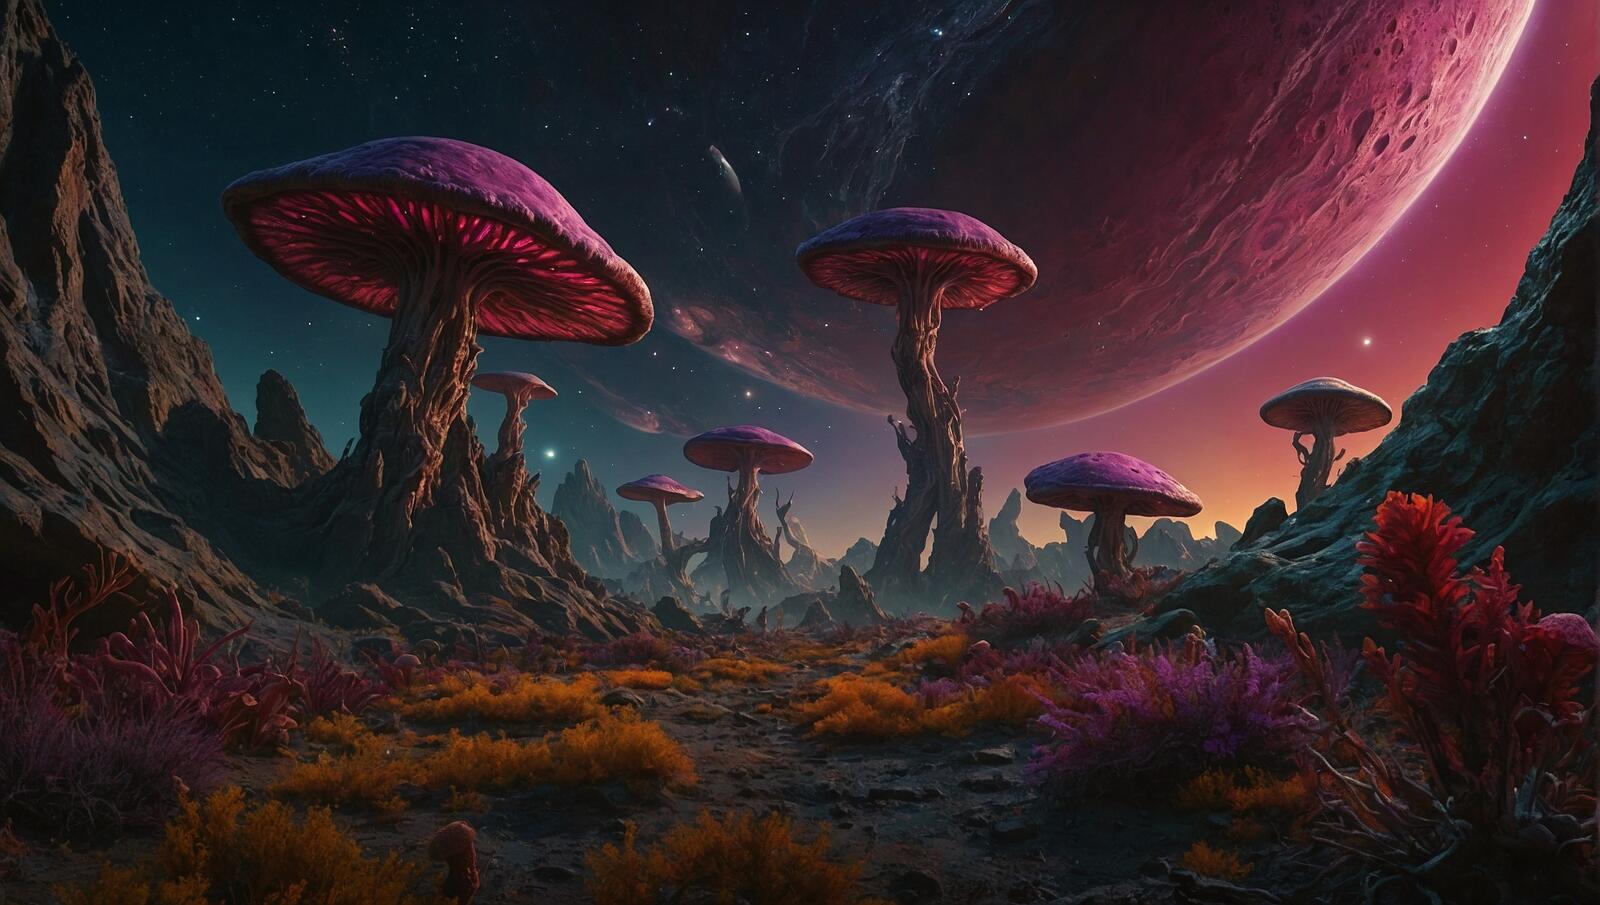 Free photo Mushrooms in the wild at night against a backdrop of distant planets